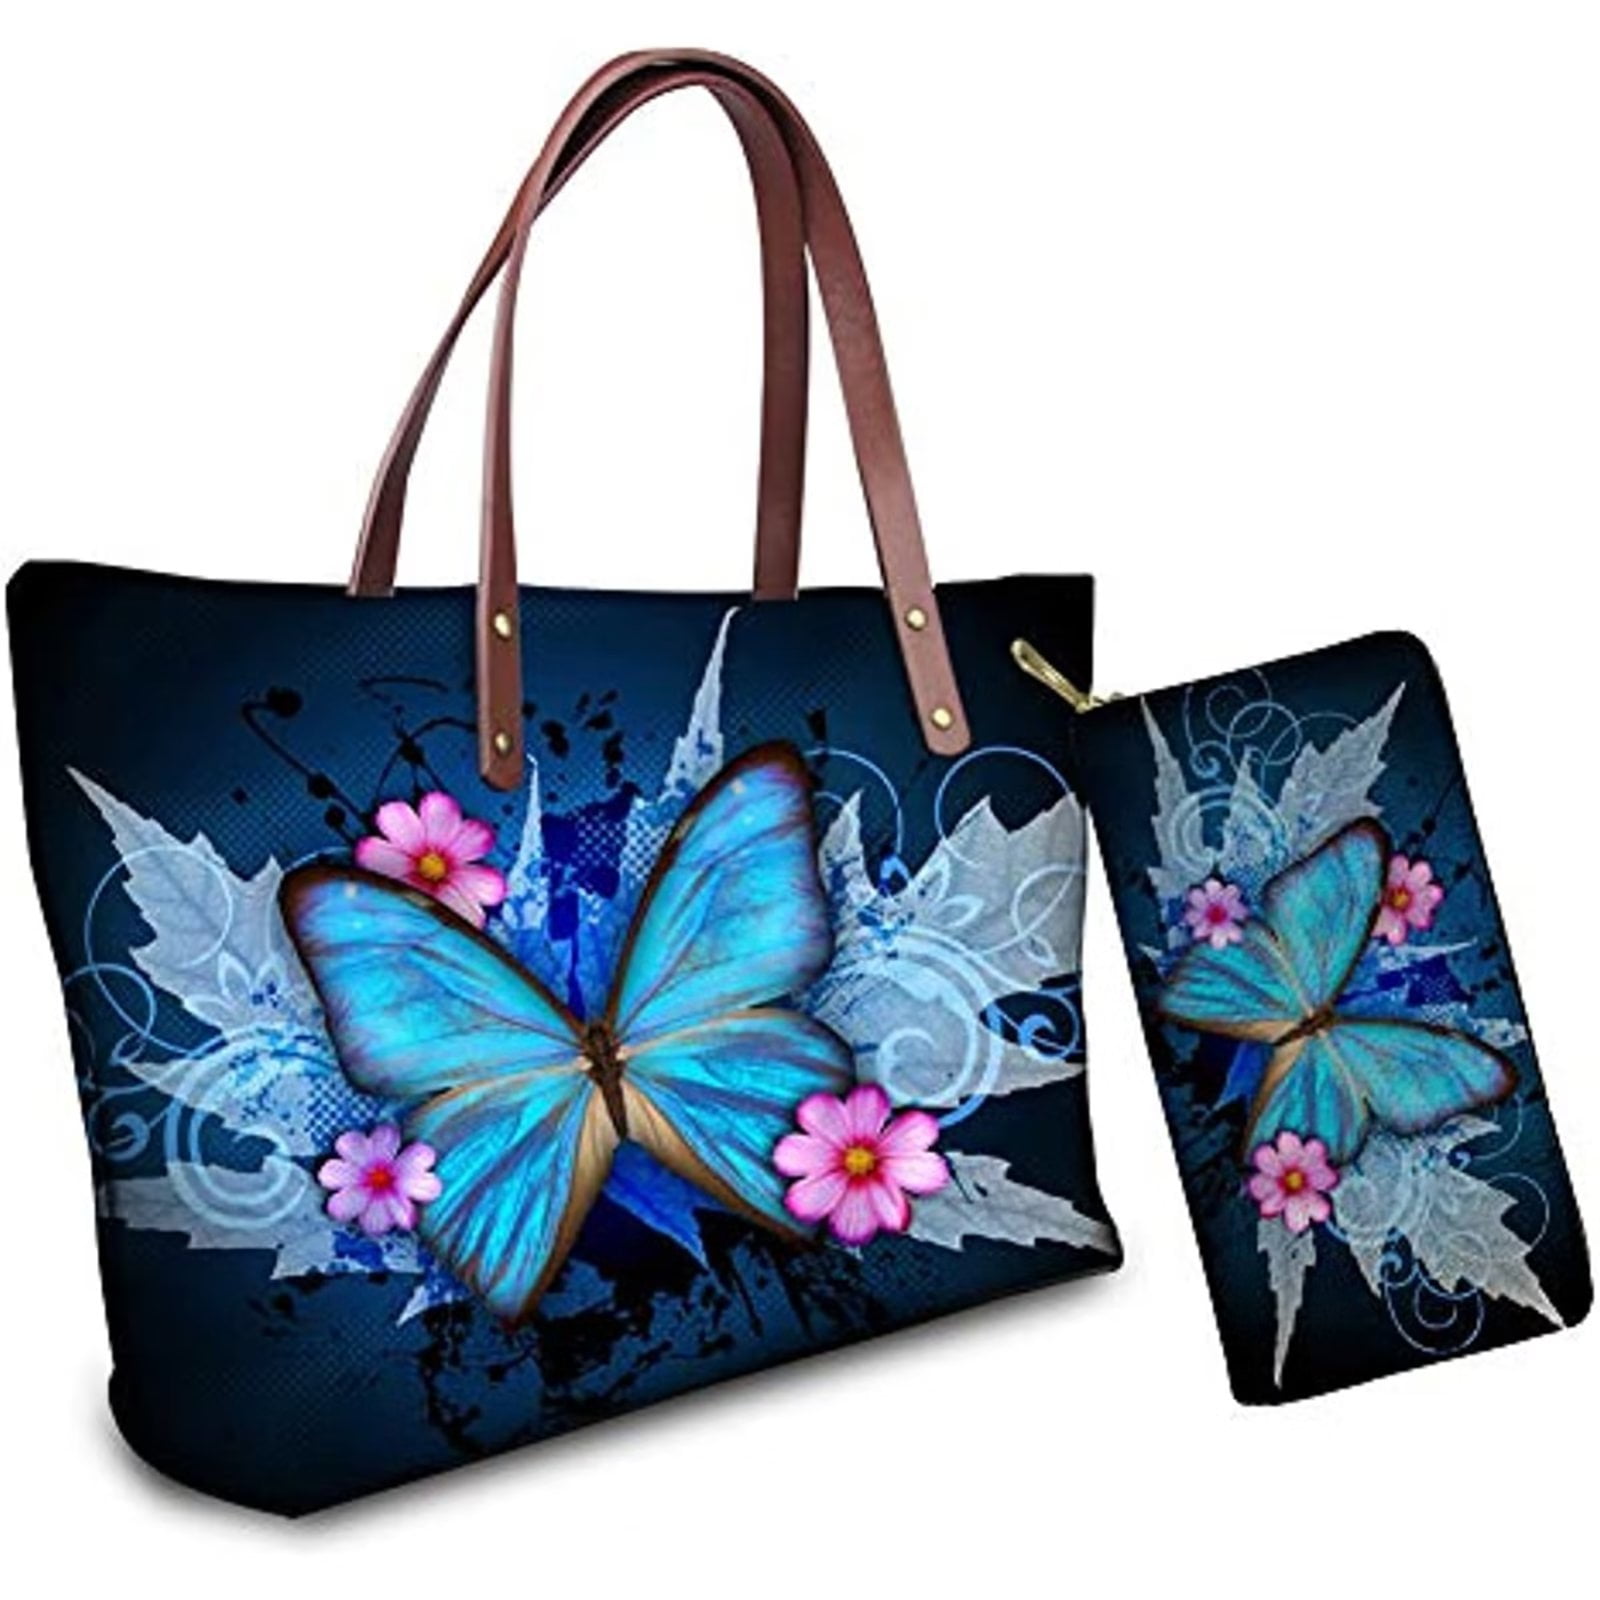 Pzuqiu Blue Butterfly Tote Purse and Wallet Set, Top Handle Bags for Women  Satchel Shoulder Handbags Large Travel Shopping Work Evening Party Tote Bag